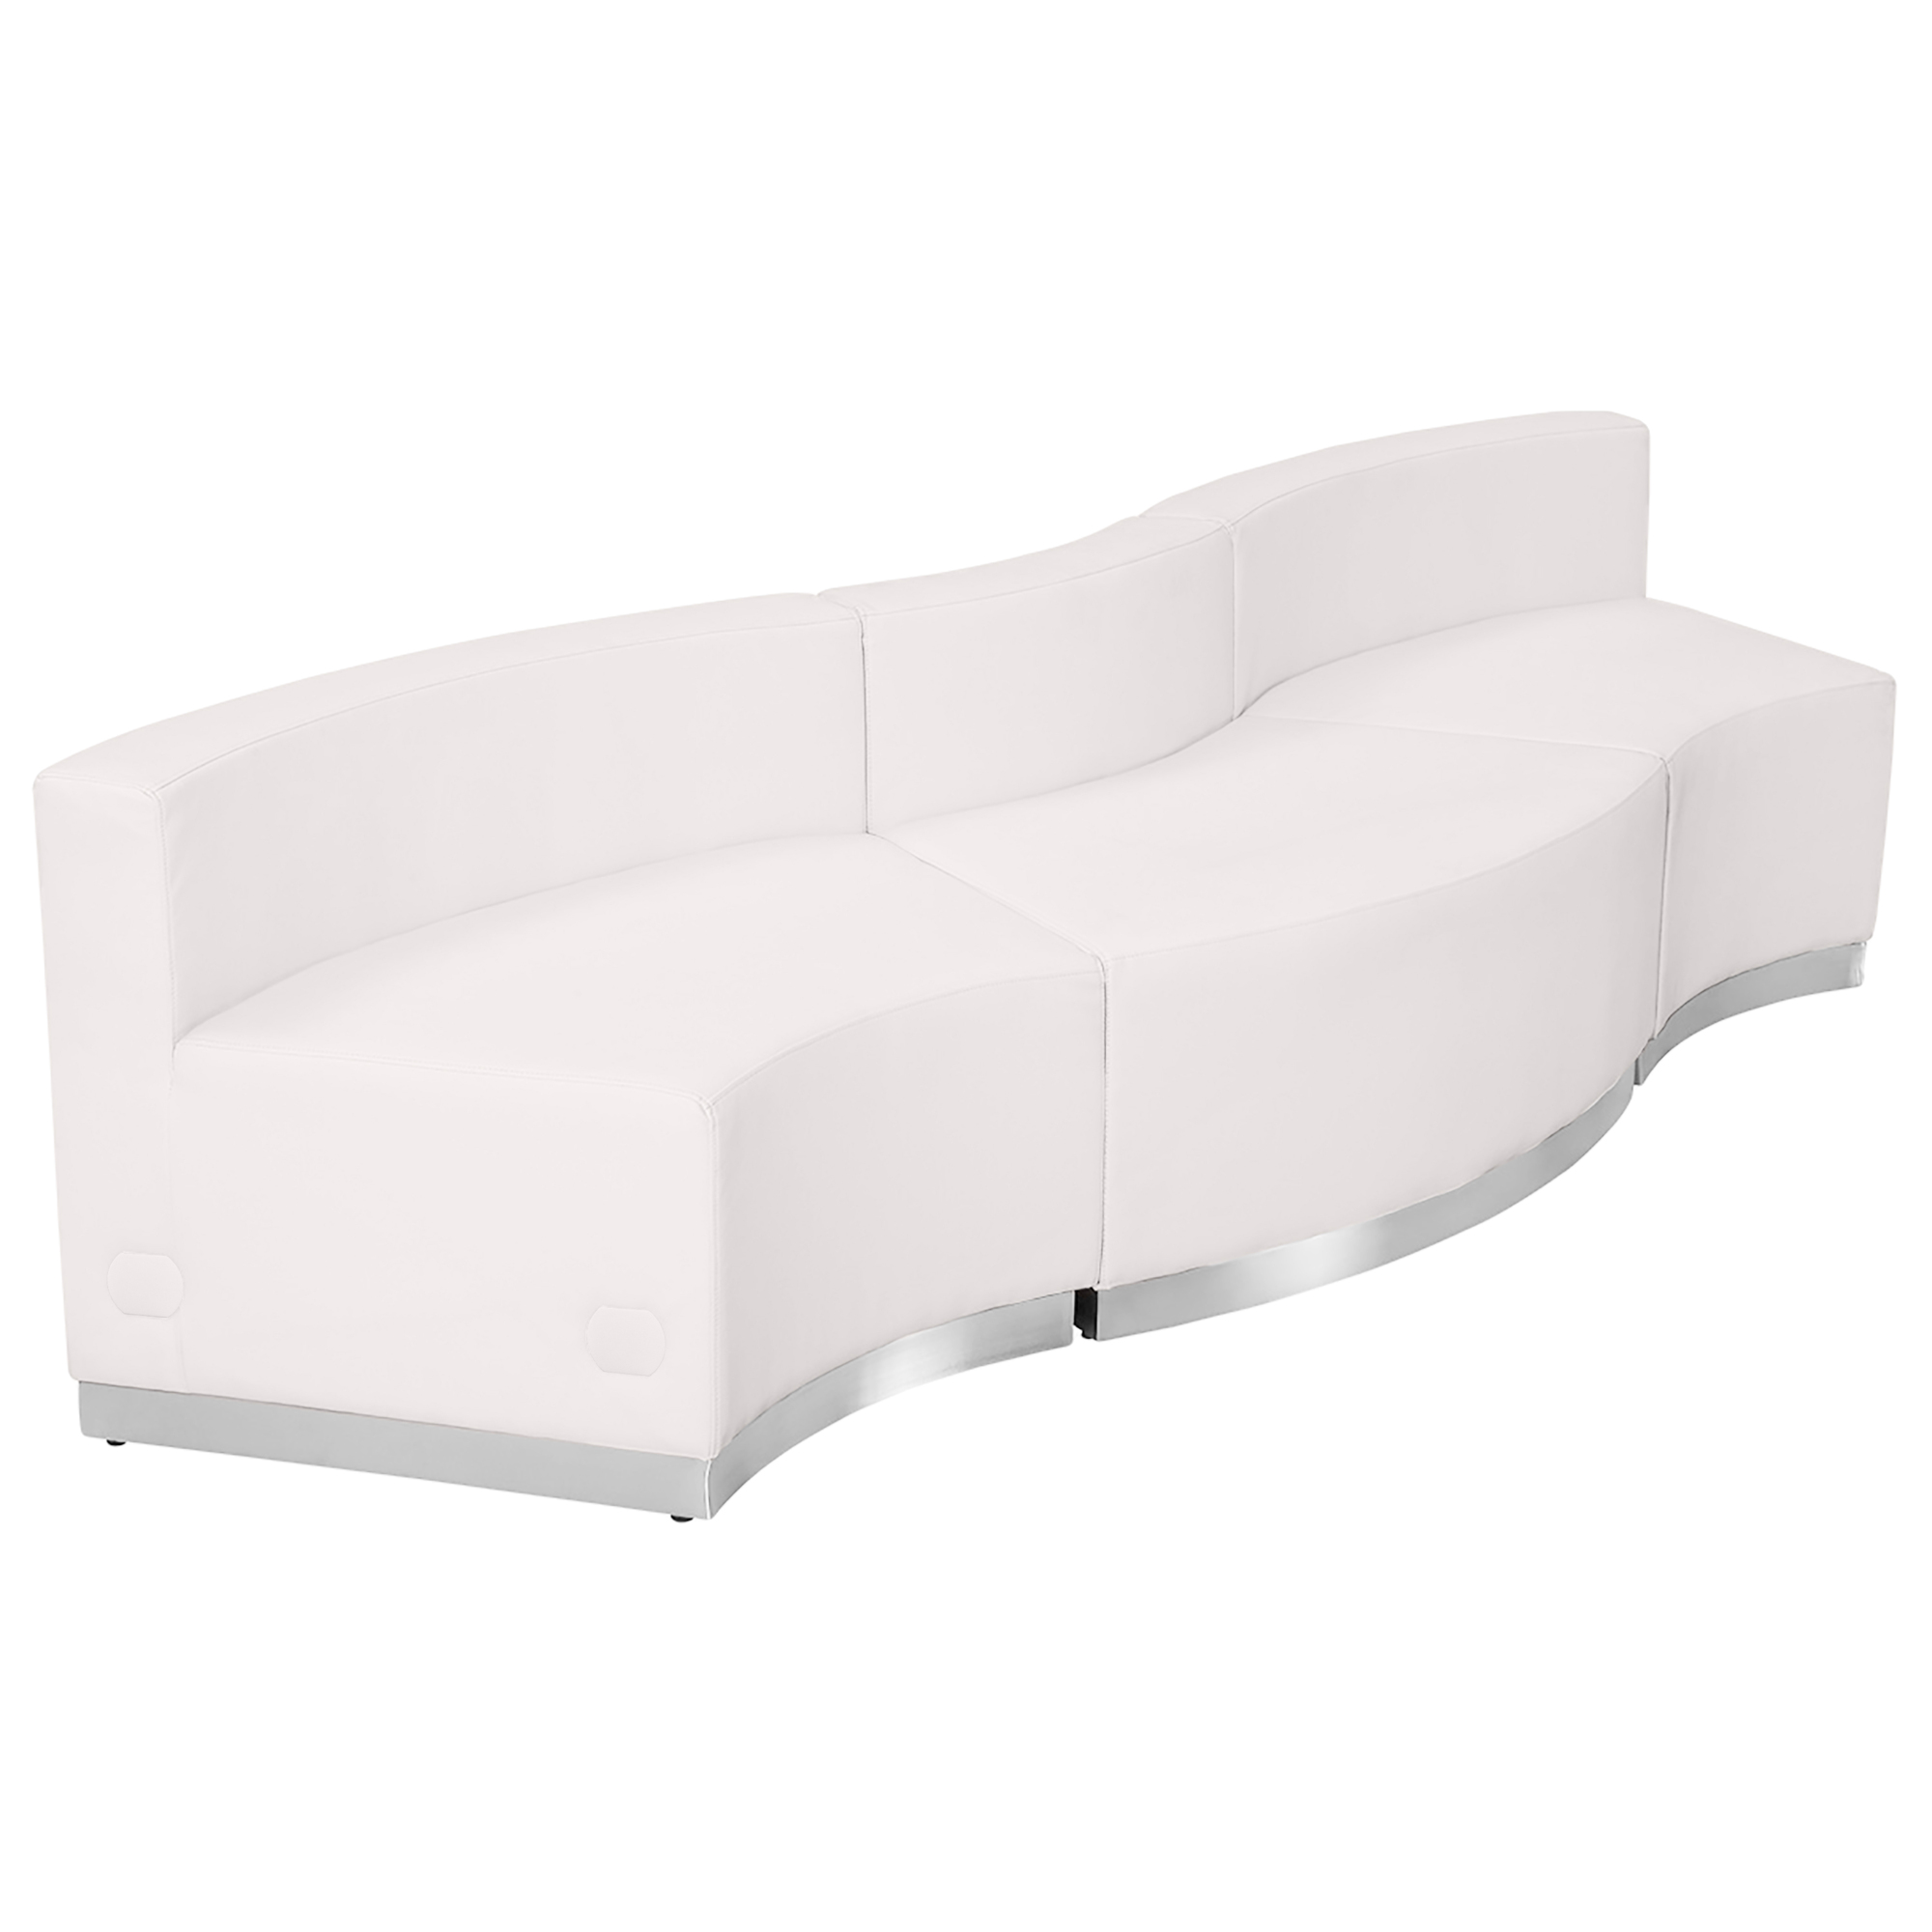 Flash Furniture, 3 PC White LeatherSoft Reception Configuration, Included (qty.) 3 Model ZB803720SWH